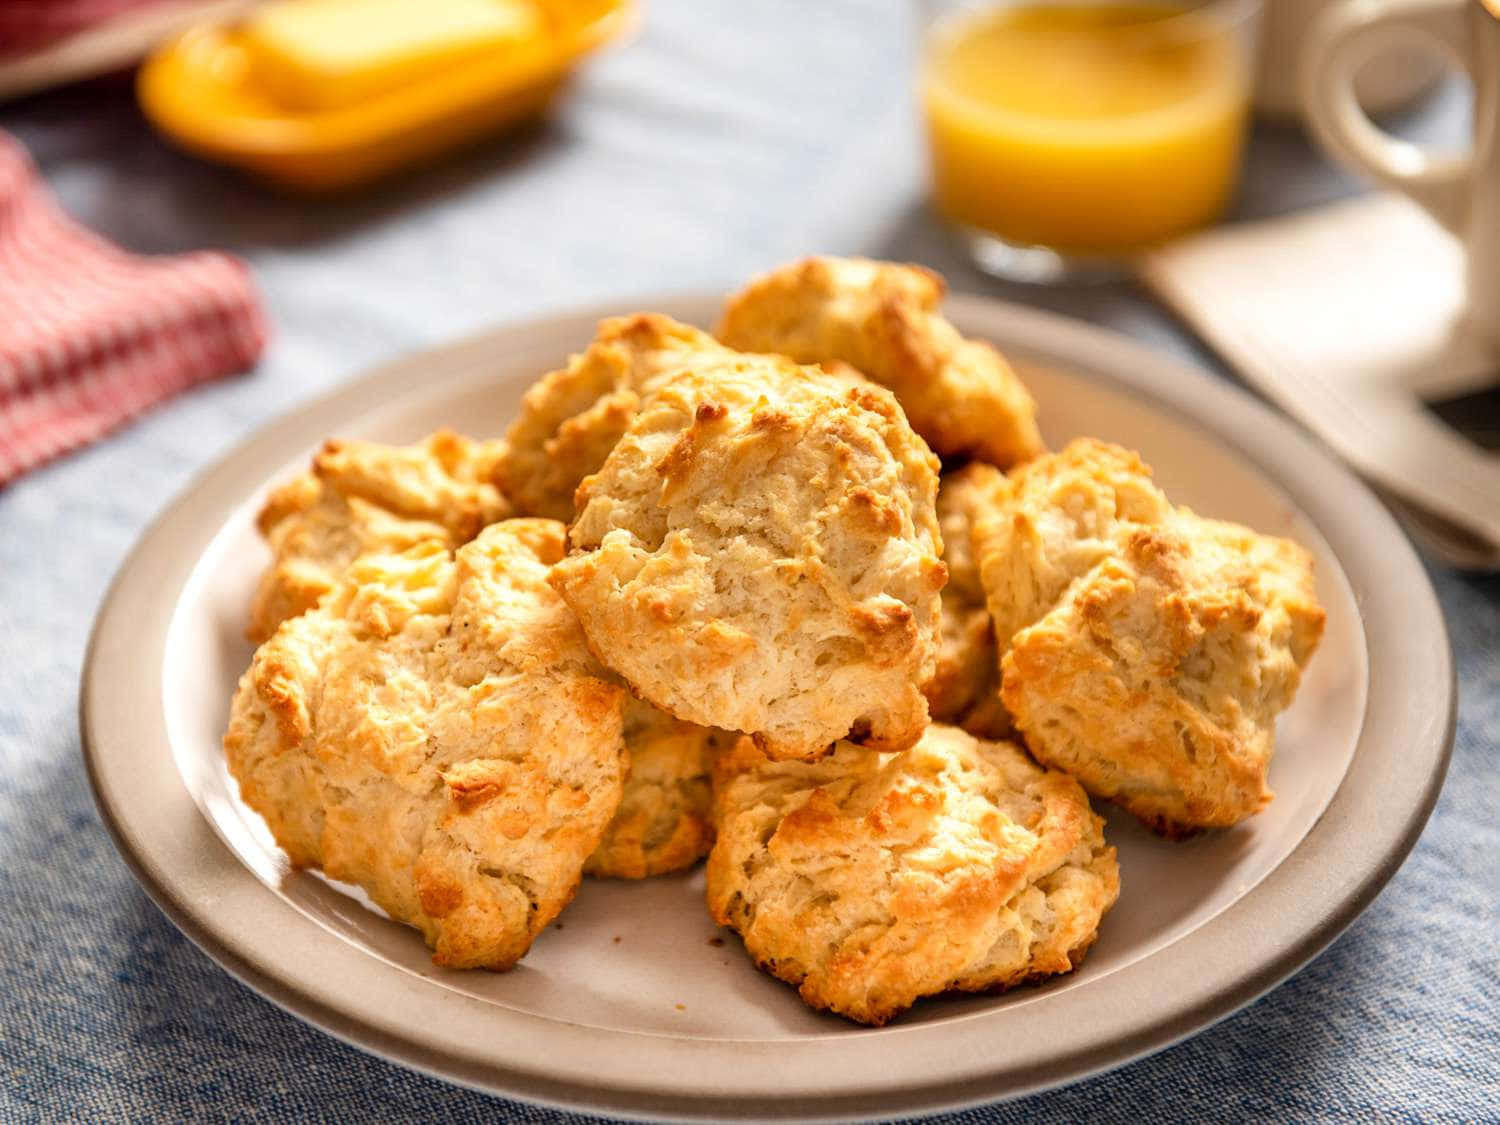 A Plate Of Biscuits With Orange Juice